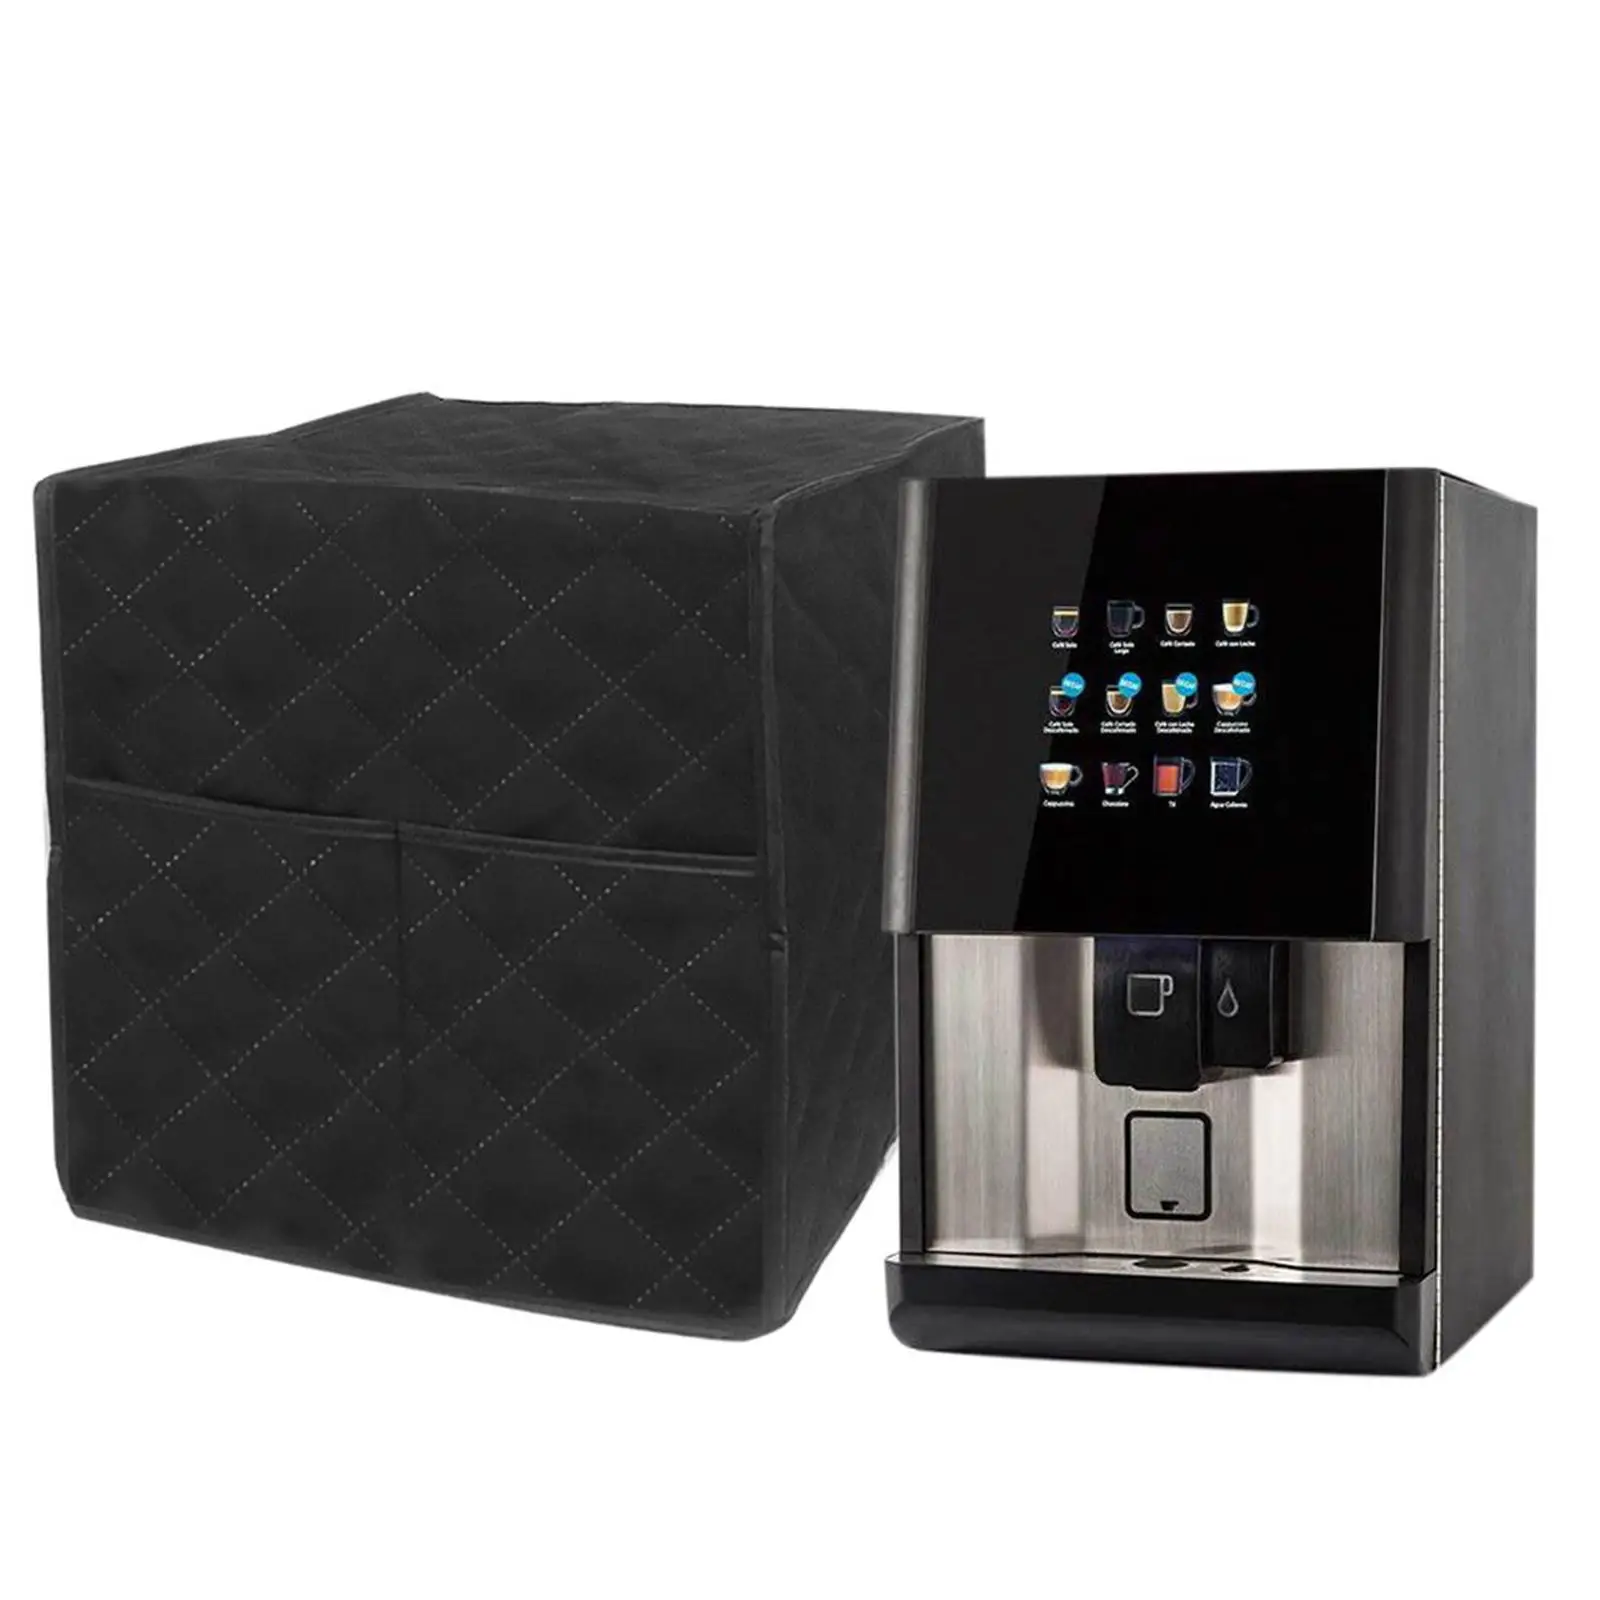 Coffee Maker Appliance Cover Dust with Storage Pocket ,13.4x13x14inch